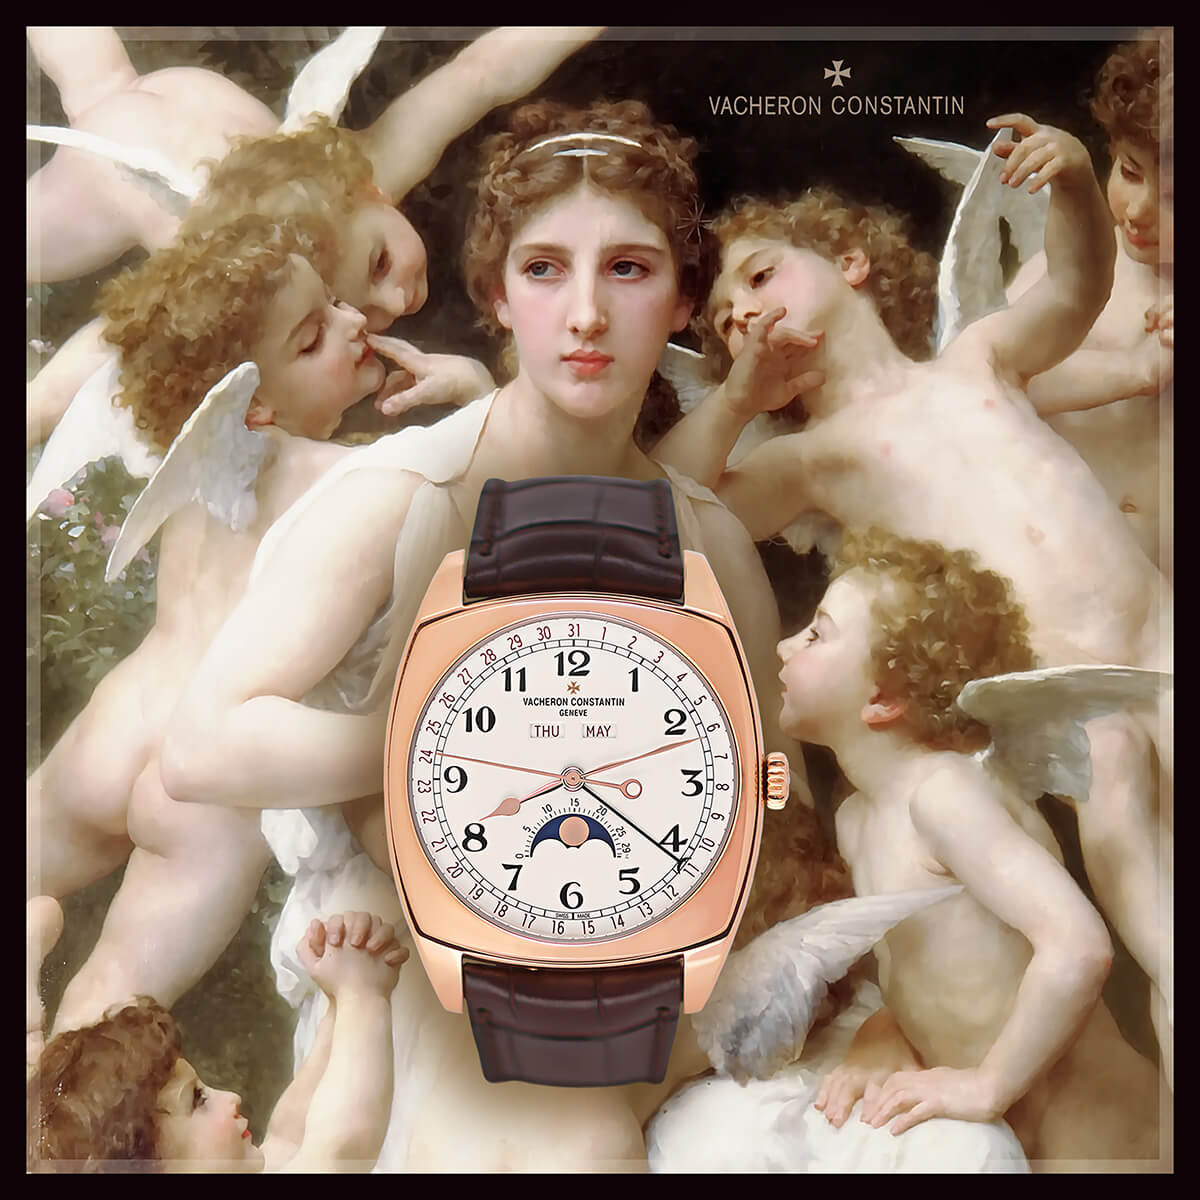 Vacheron Constantin Harmony Complete Calendar and The Assualt by William Bouguereau (image courtesy @thehealer74)